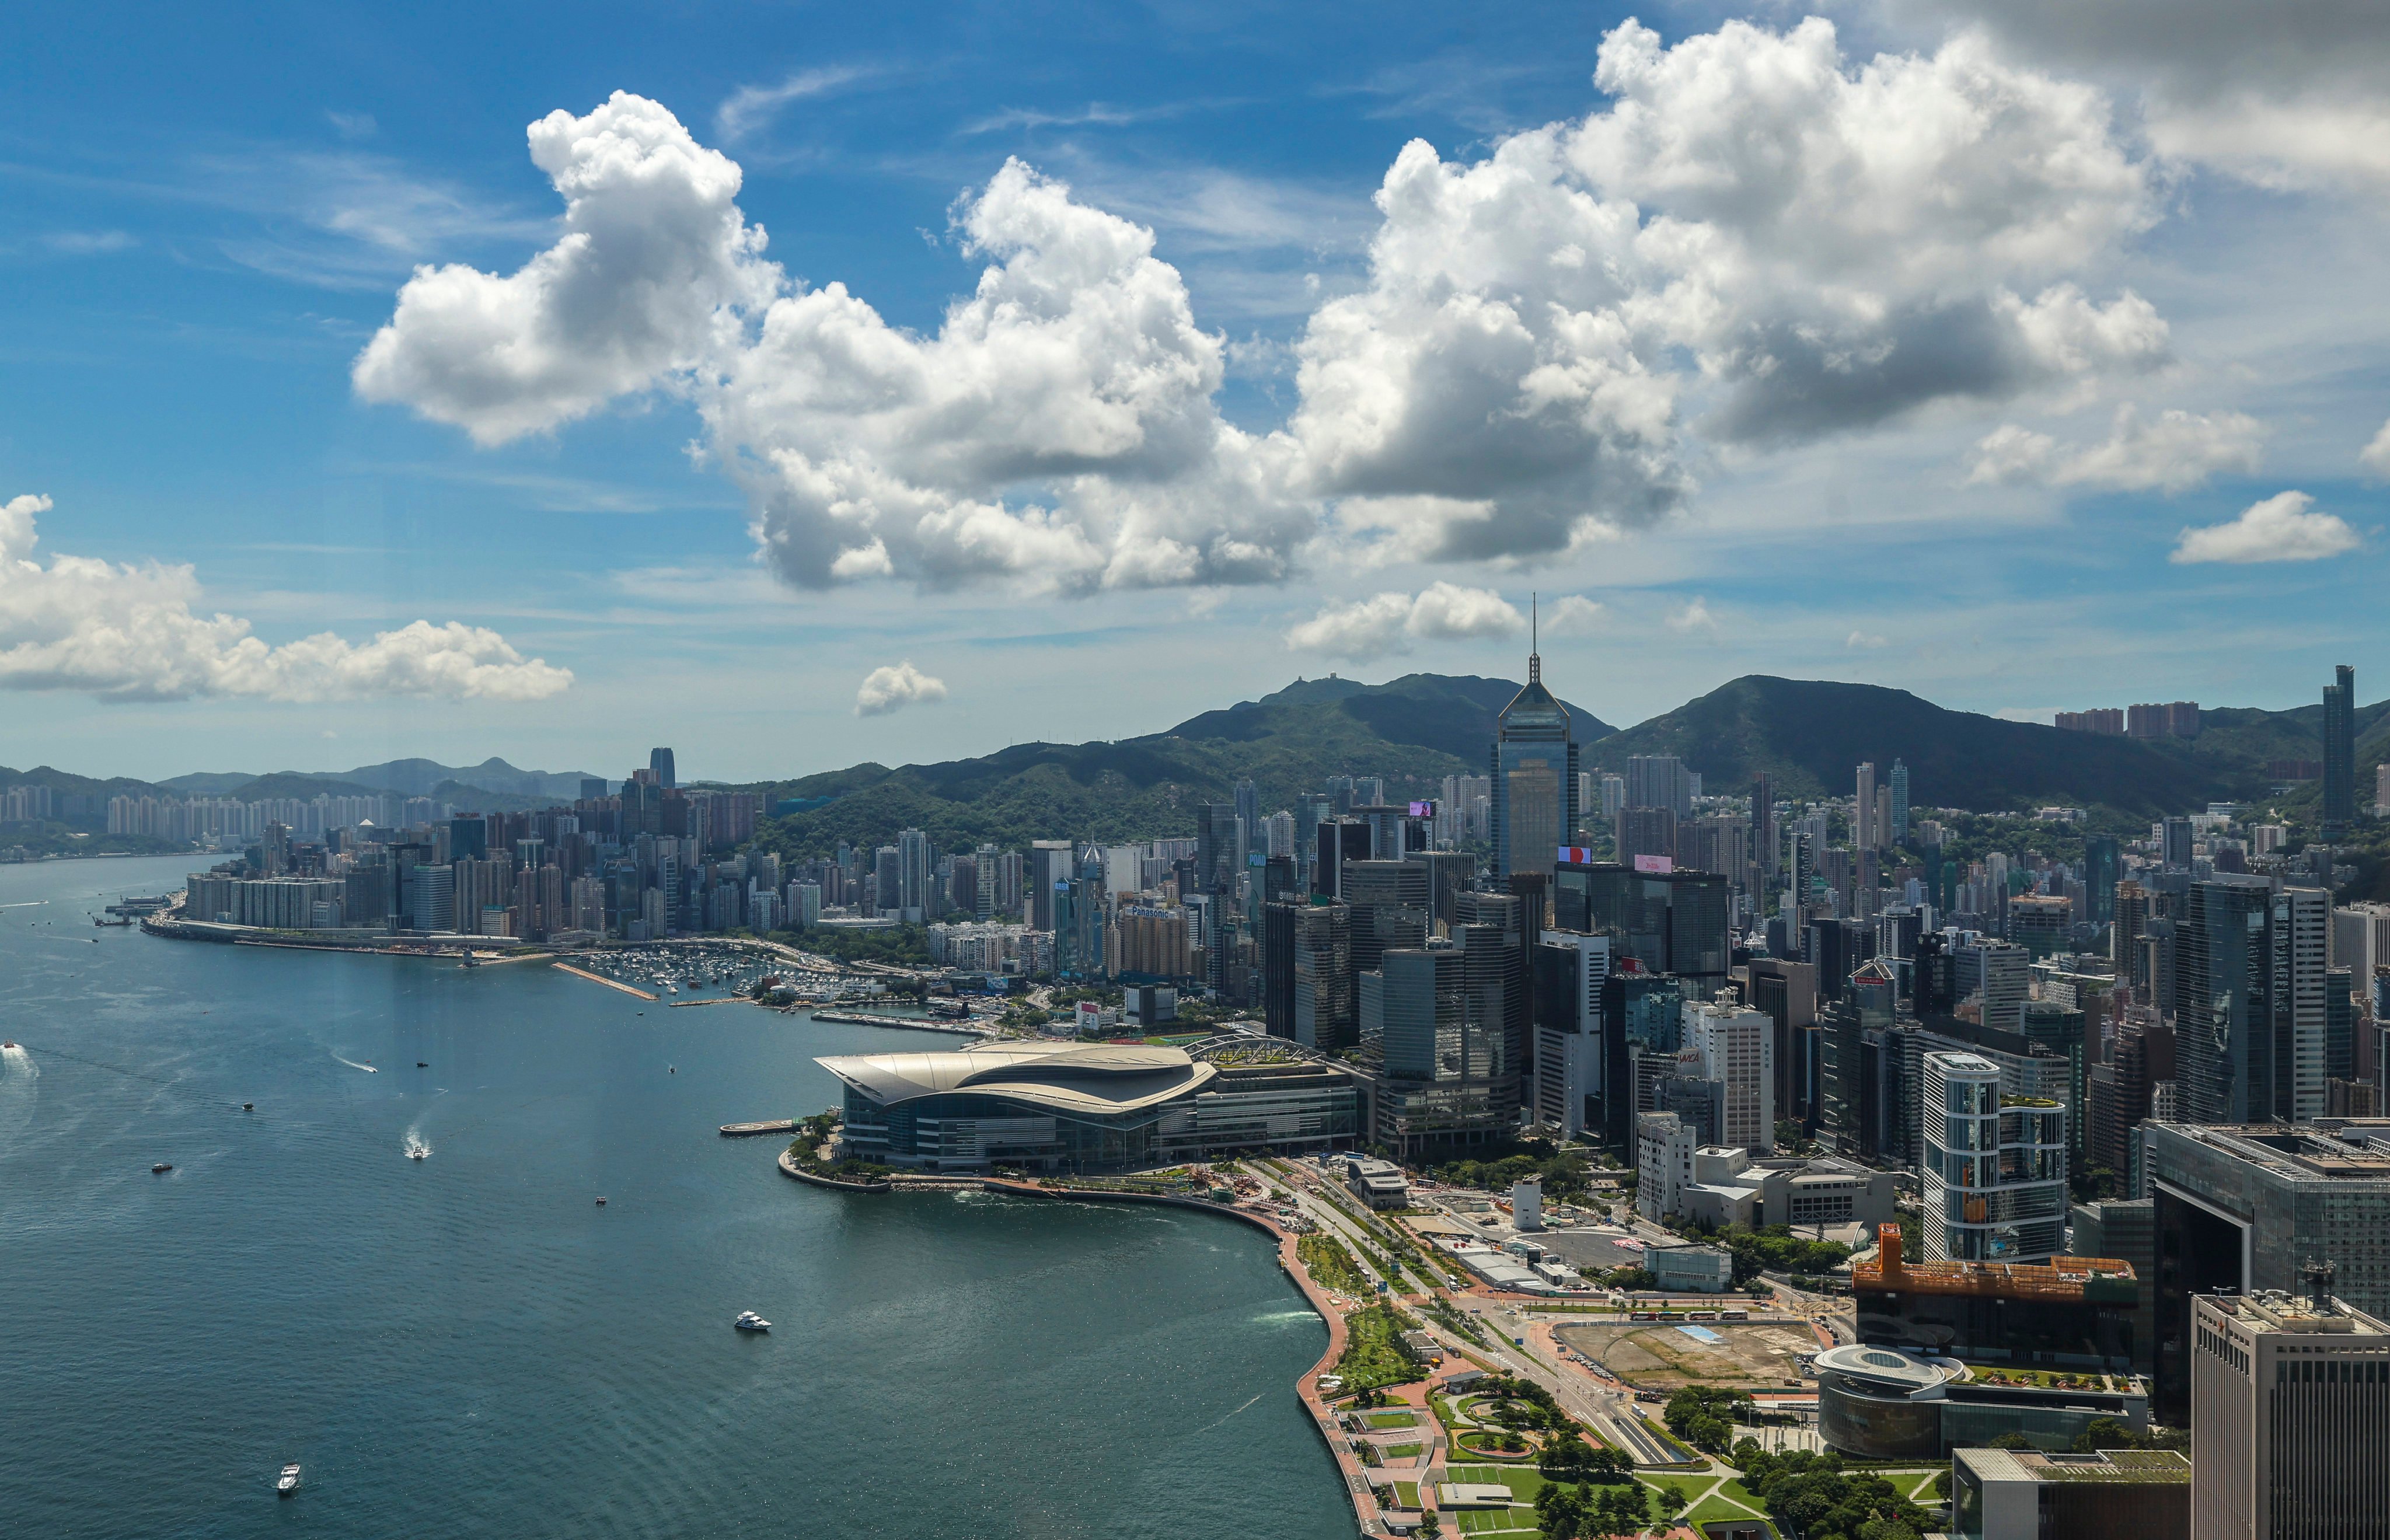 Hong Kong will pursue more collaborative opportunities with the Greater Bay Area as part of efforts to become an I&T hub, the city’s finance chief has said. Photo: Edmond So